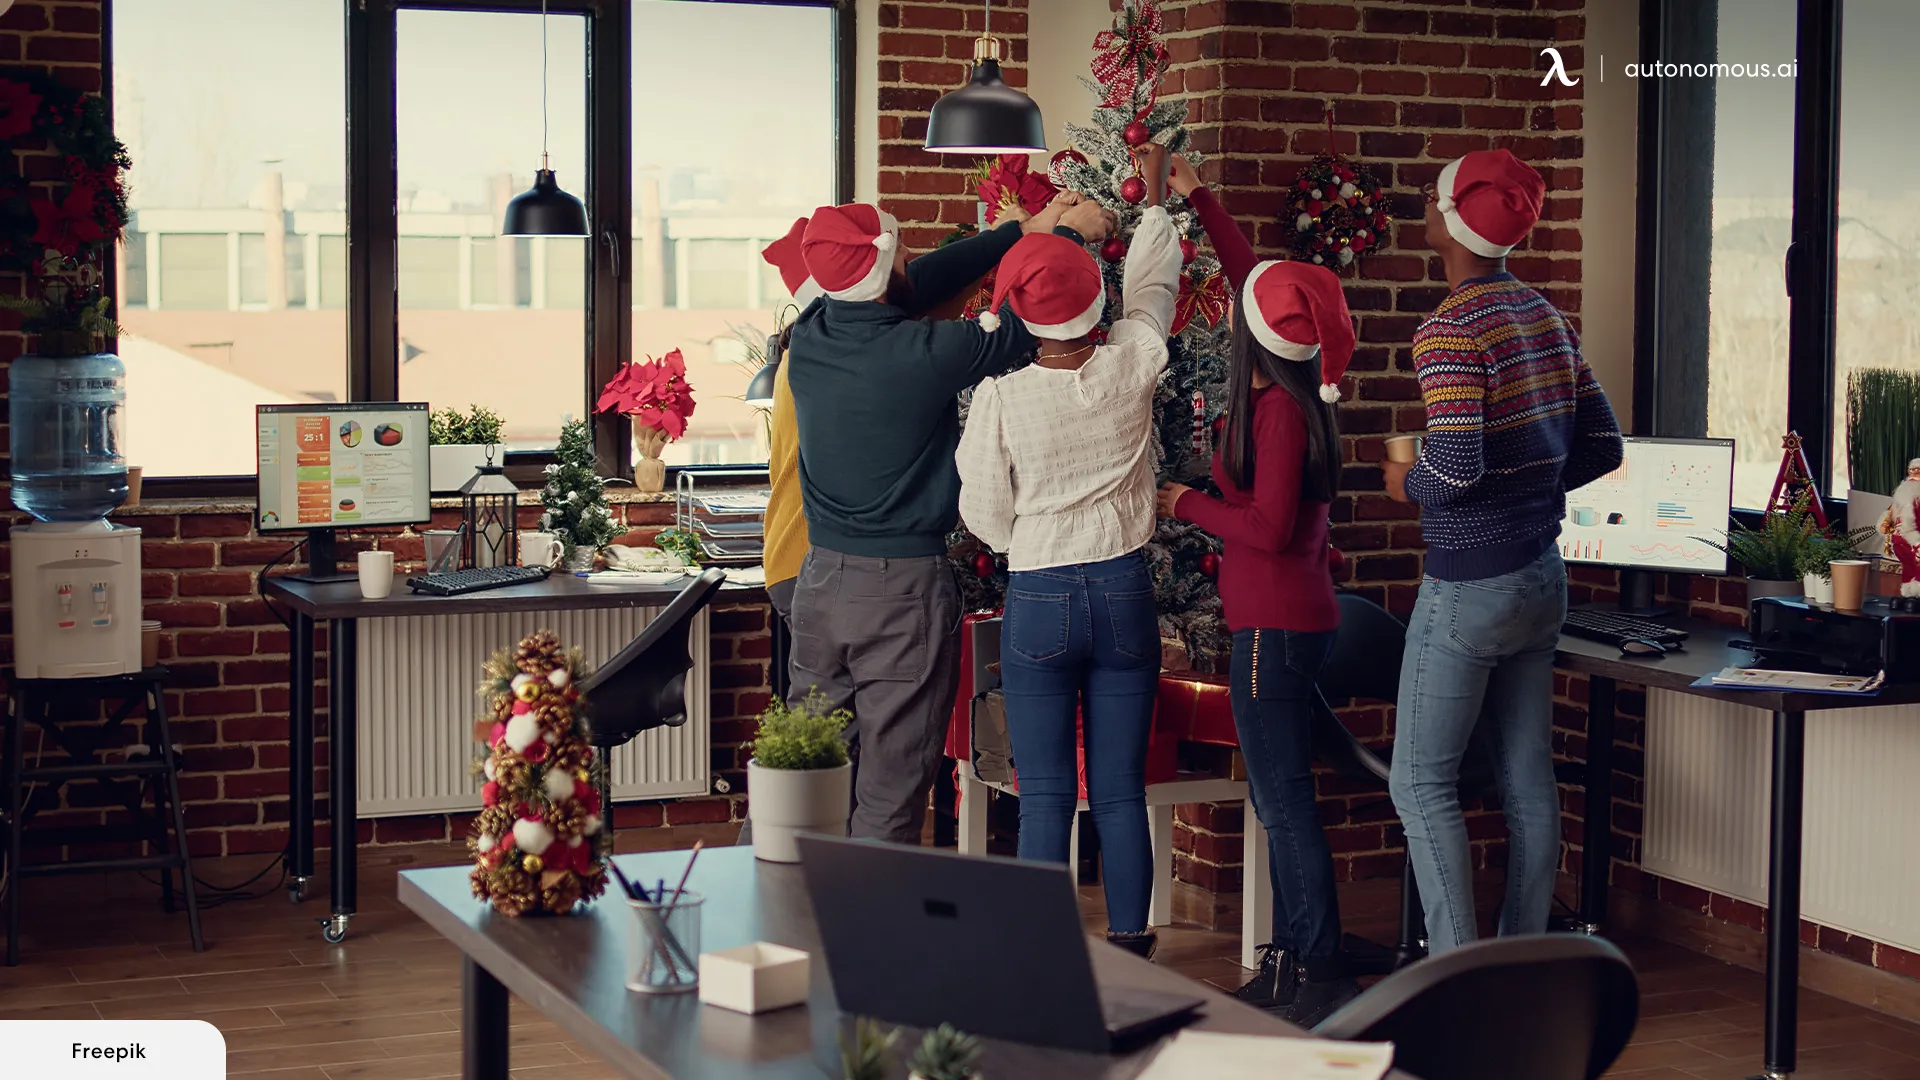 Xmas Office Activities: Enjoy the Holiday with Festive Fun